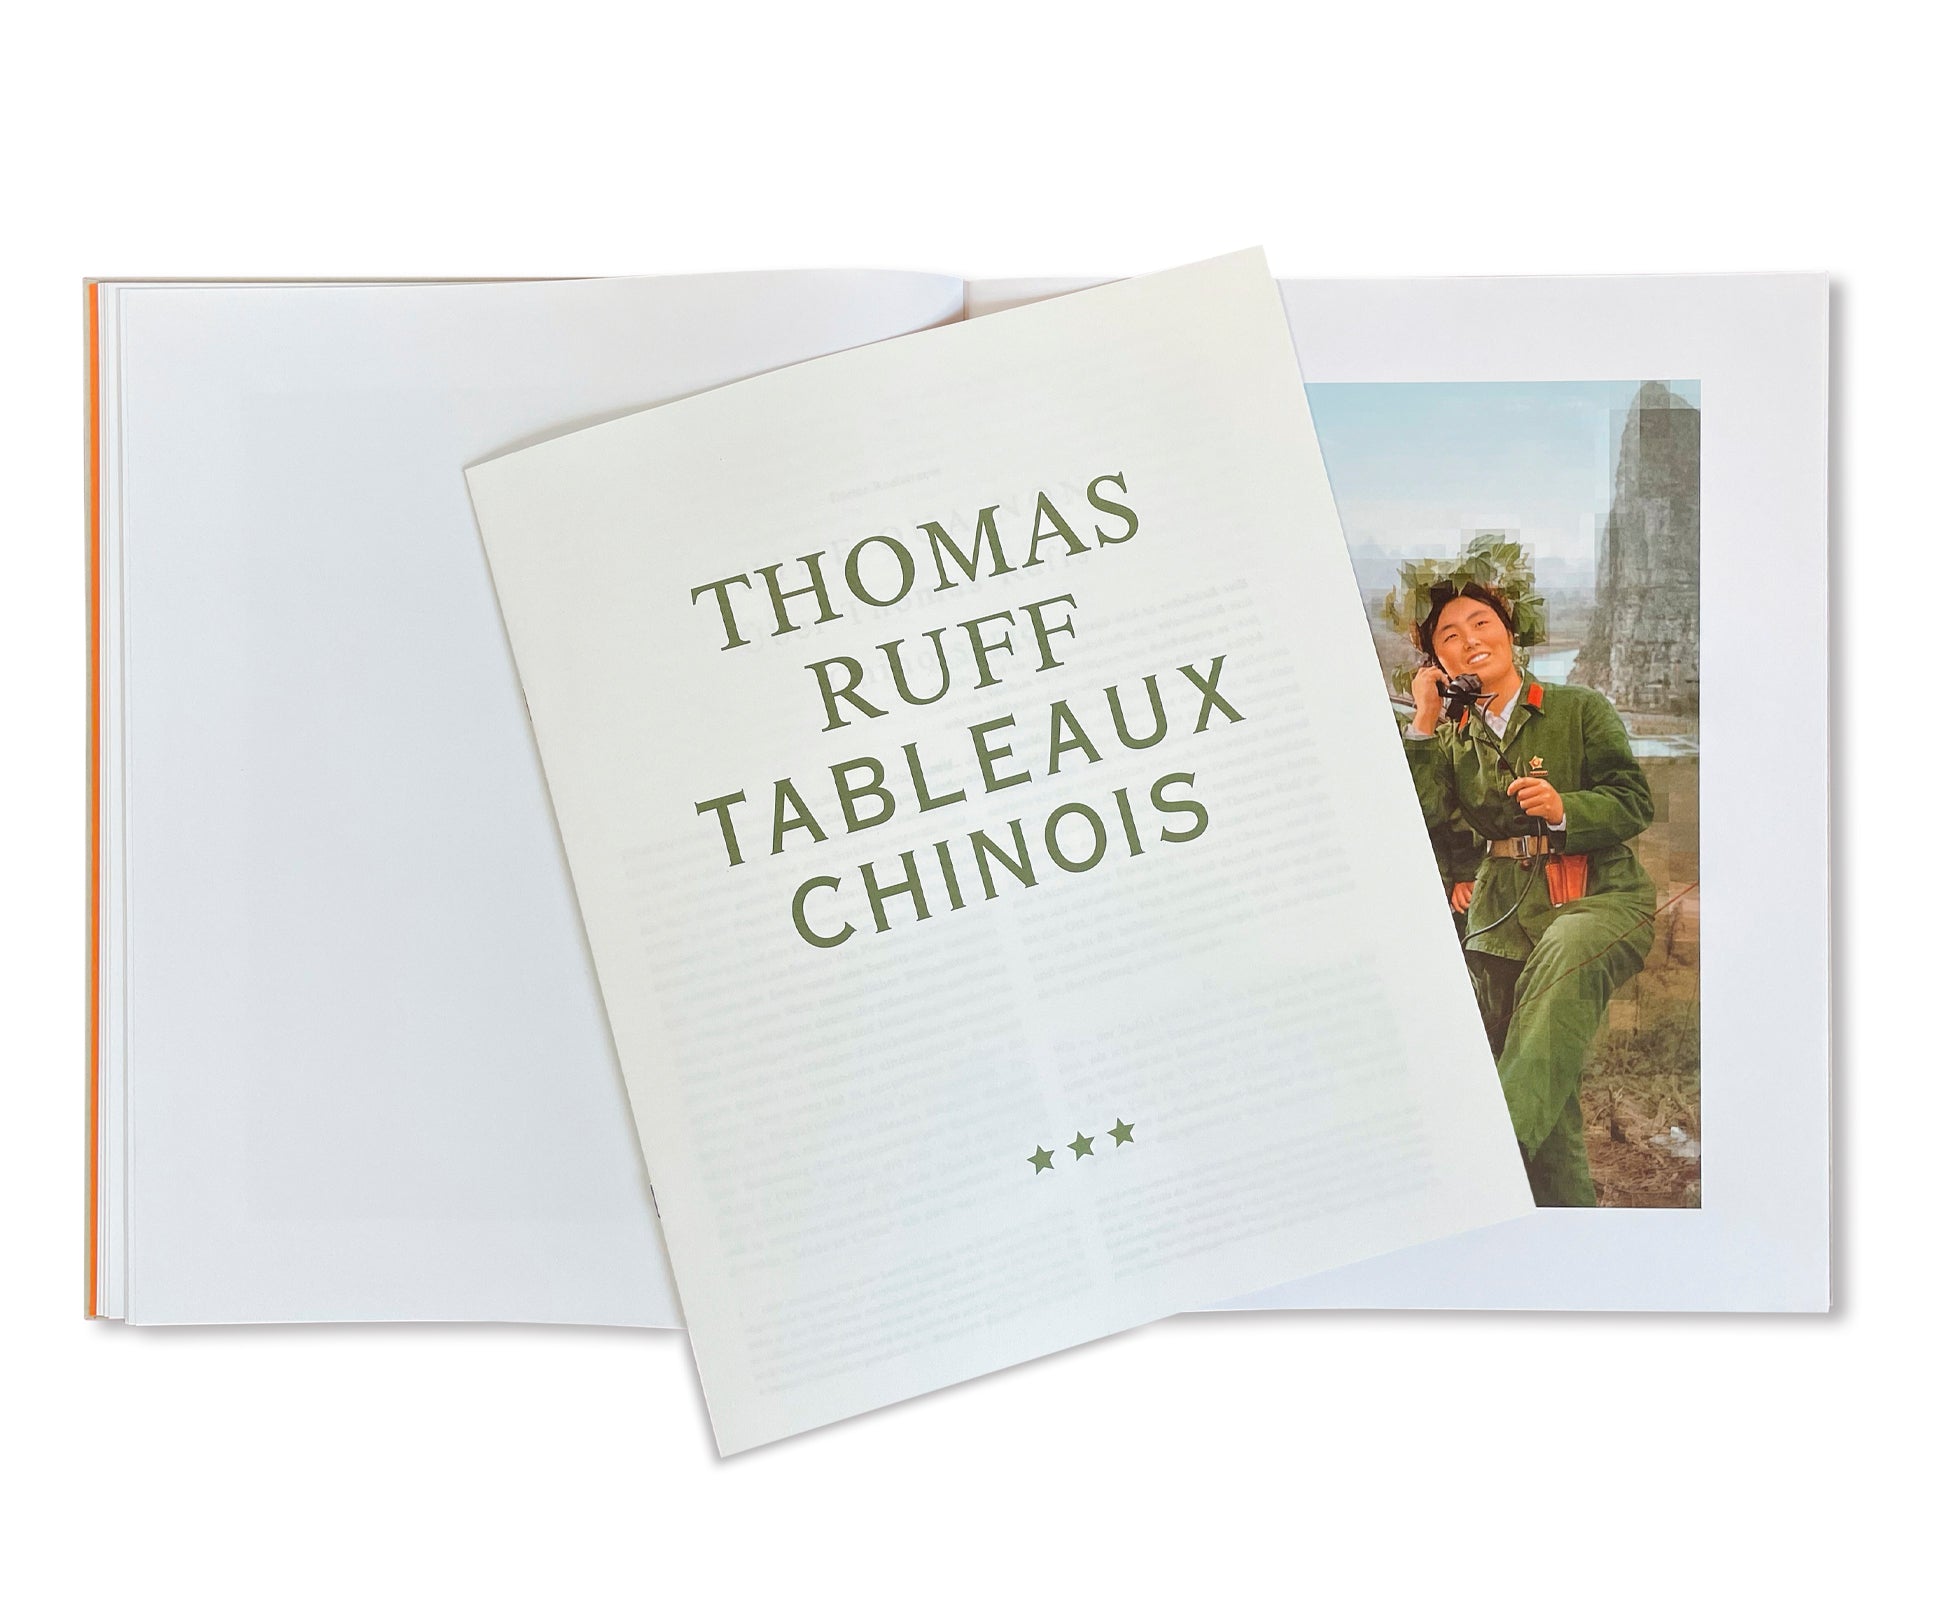 TABLEAUX CHINOIS by Thomas Ruff [SPECIAL EDITION (FLIEGER)]